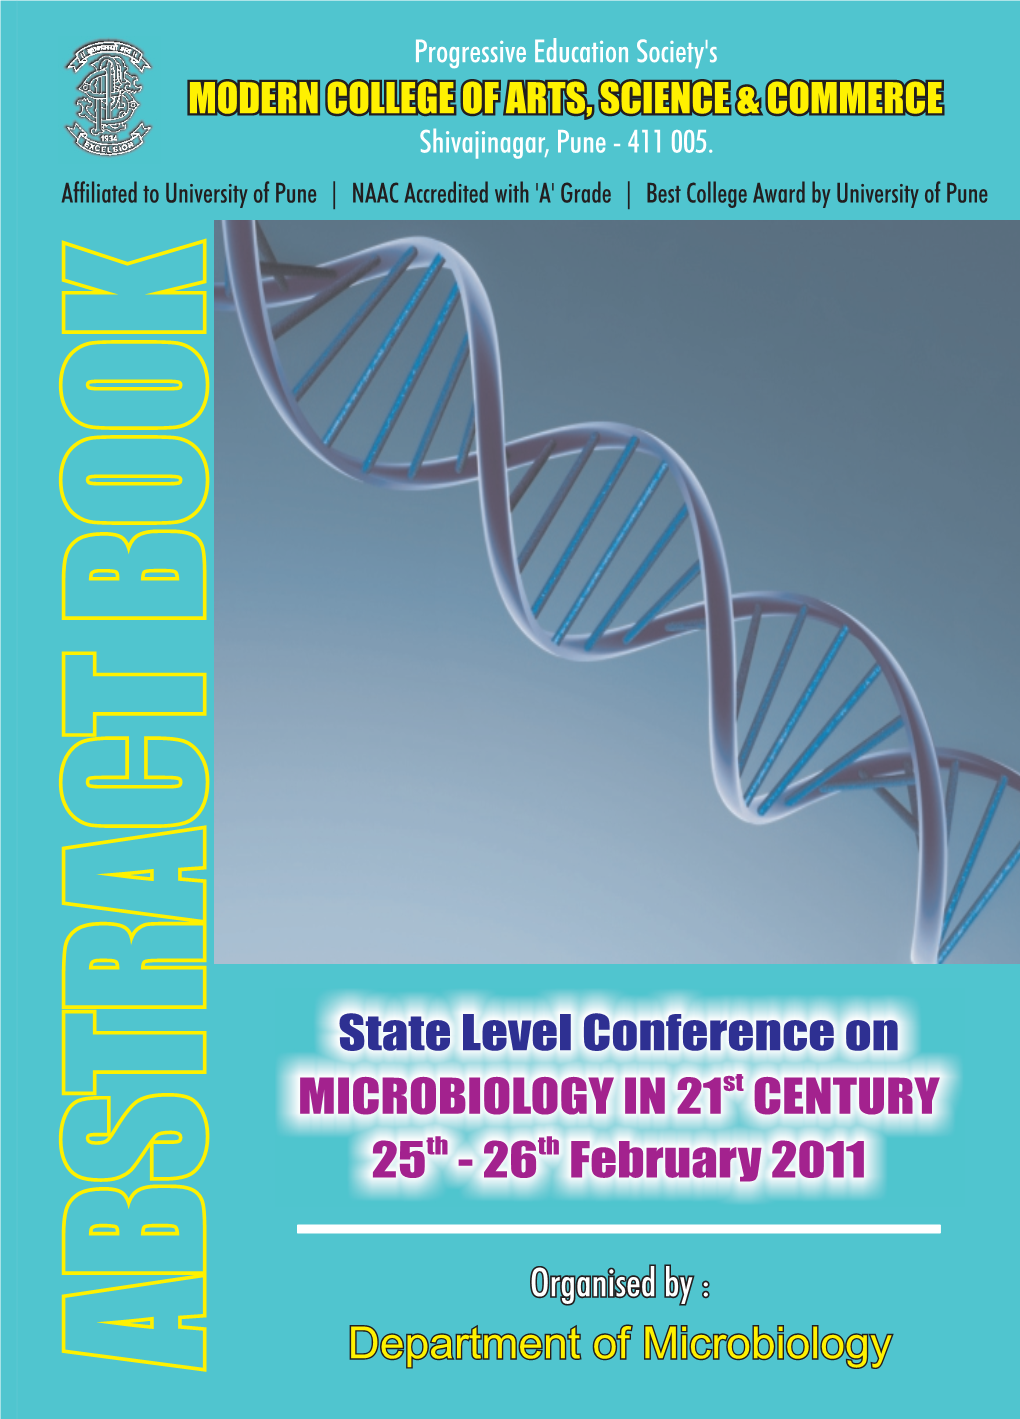 State Level Conference on Microbiology in 21St Century 25-26